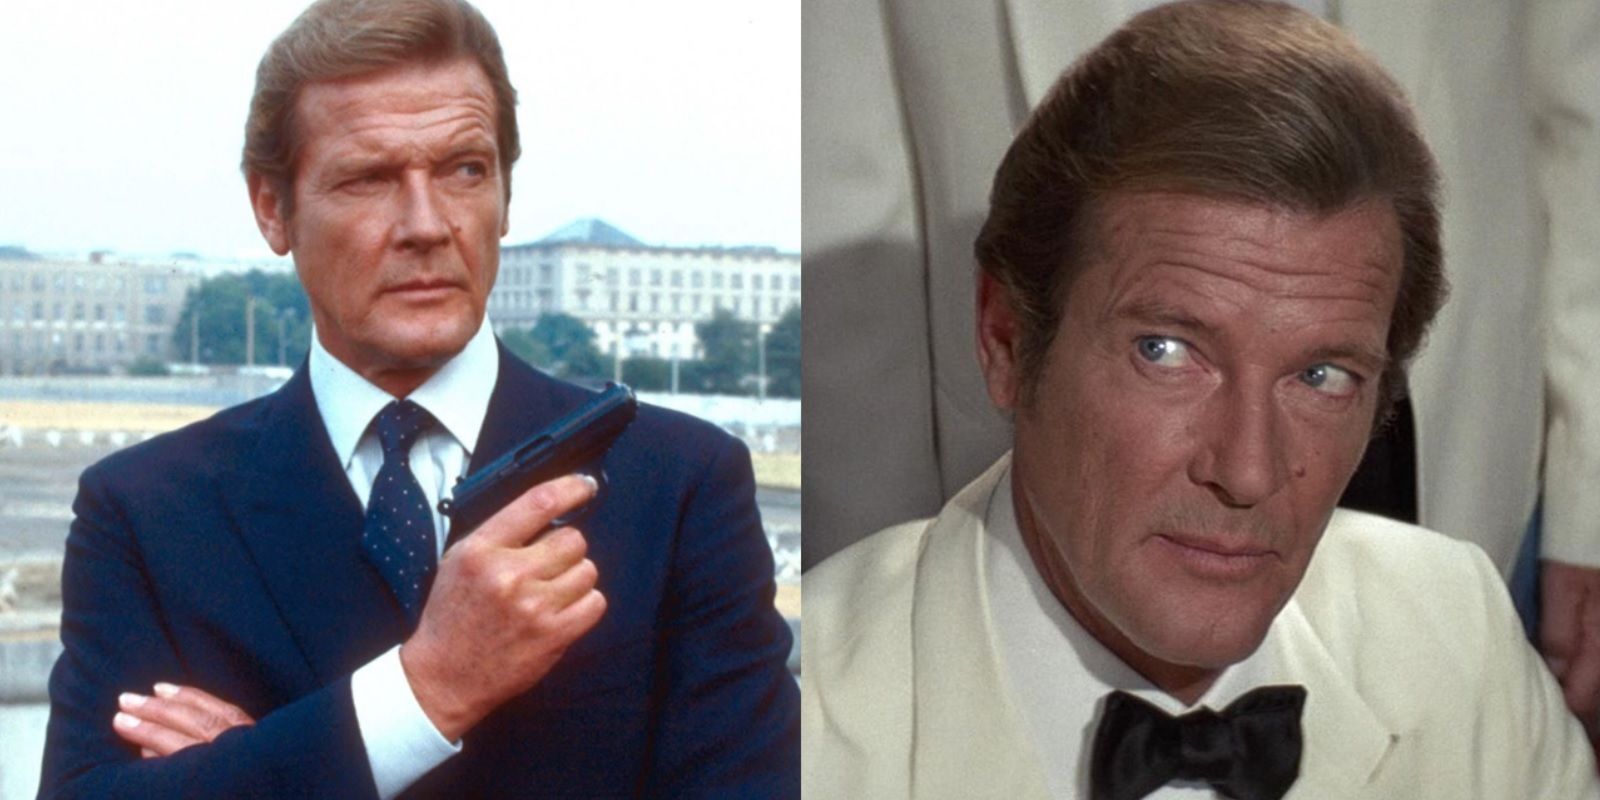 Split image of Roger Moore holding a gun and wearing a tuxedo as James Bond